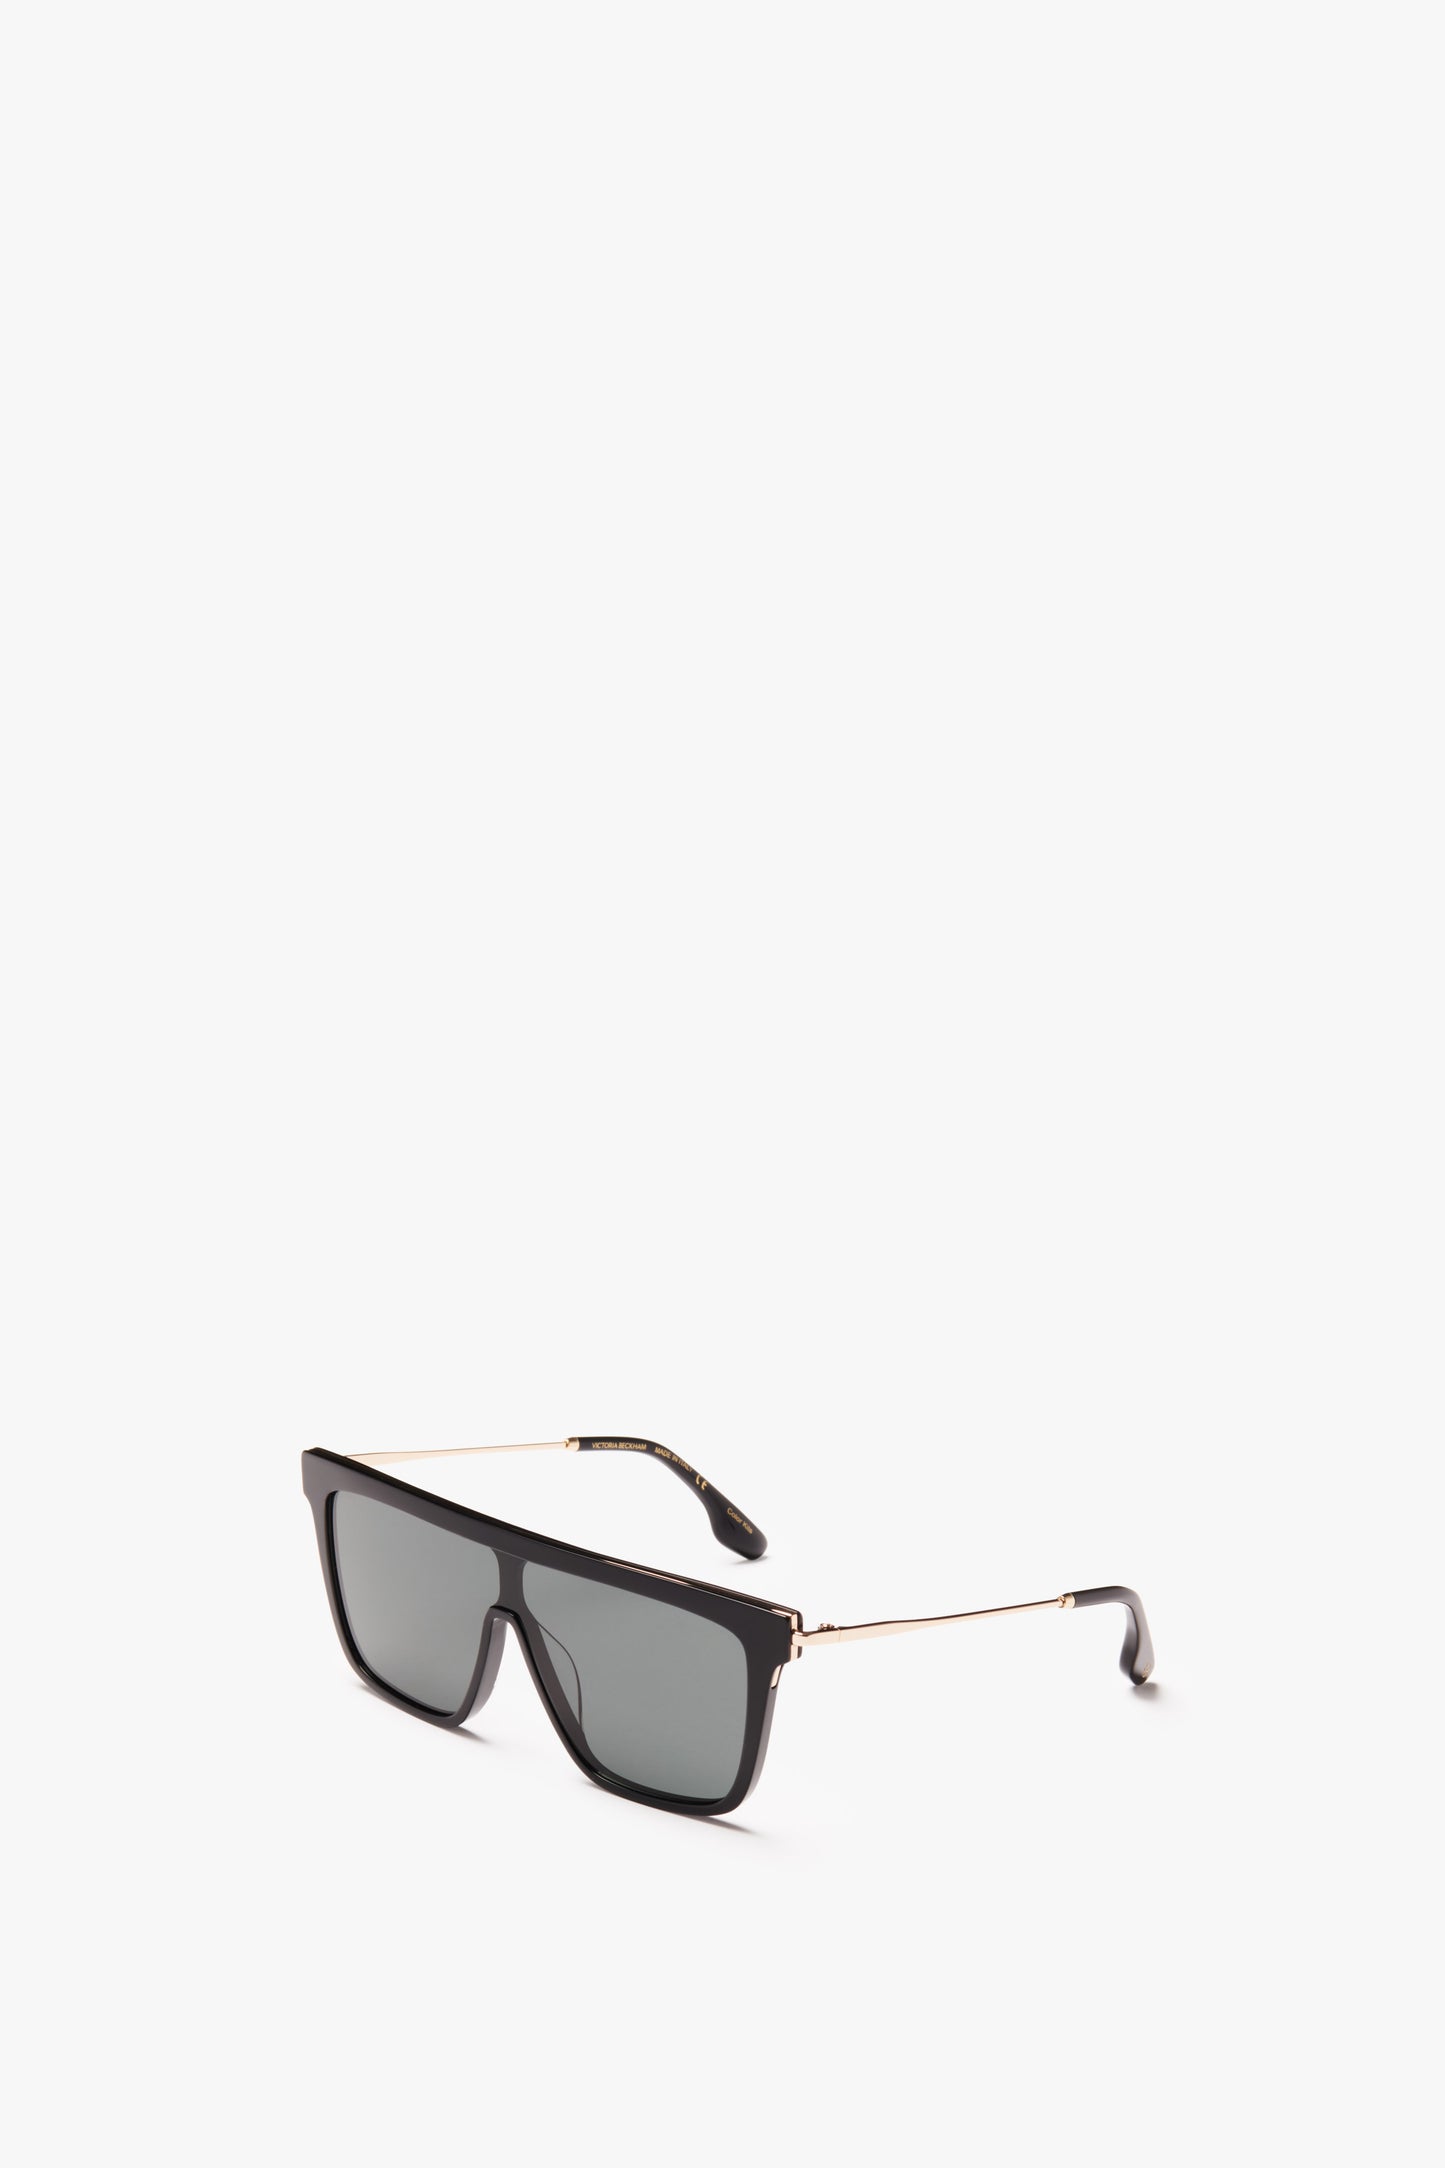 A pair of Rectangular Shield Sunglasses In Black with a thin gold frame, isolated on a white background, featuring the Victoria Beckham Eyewear design.